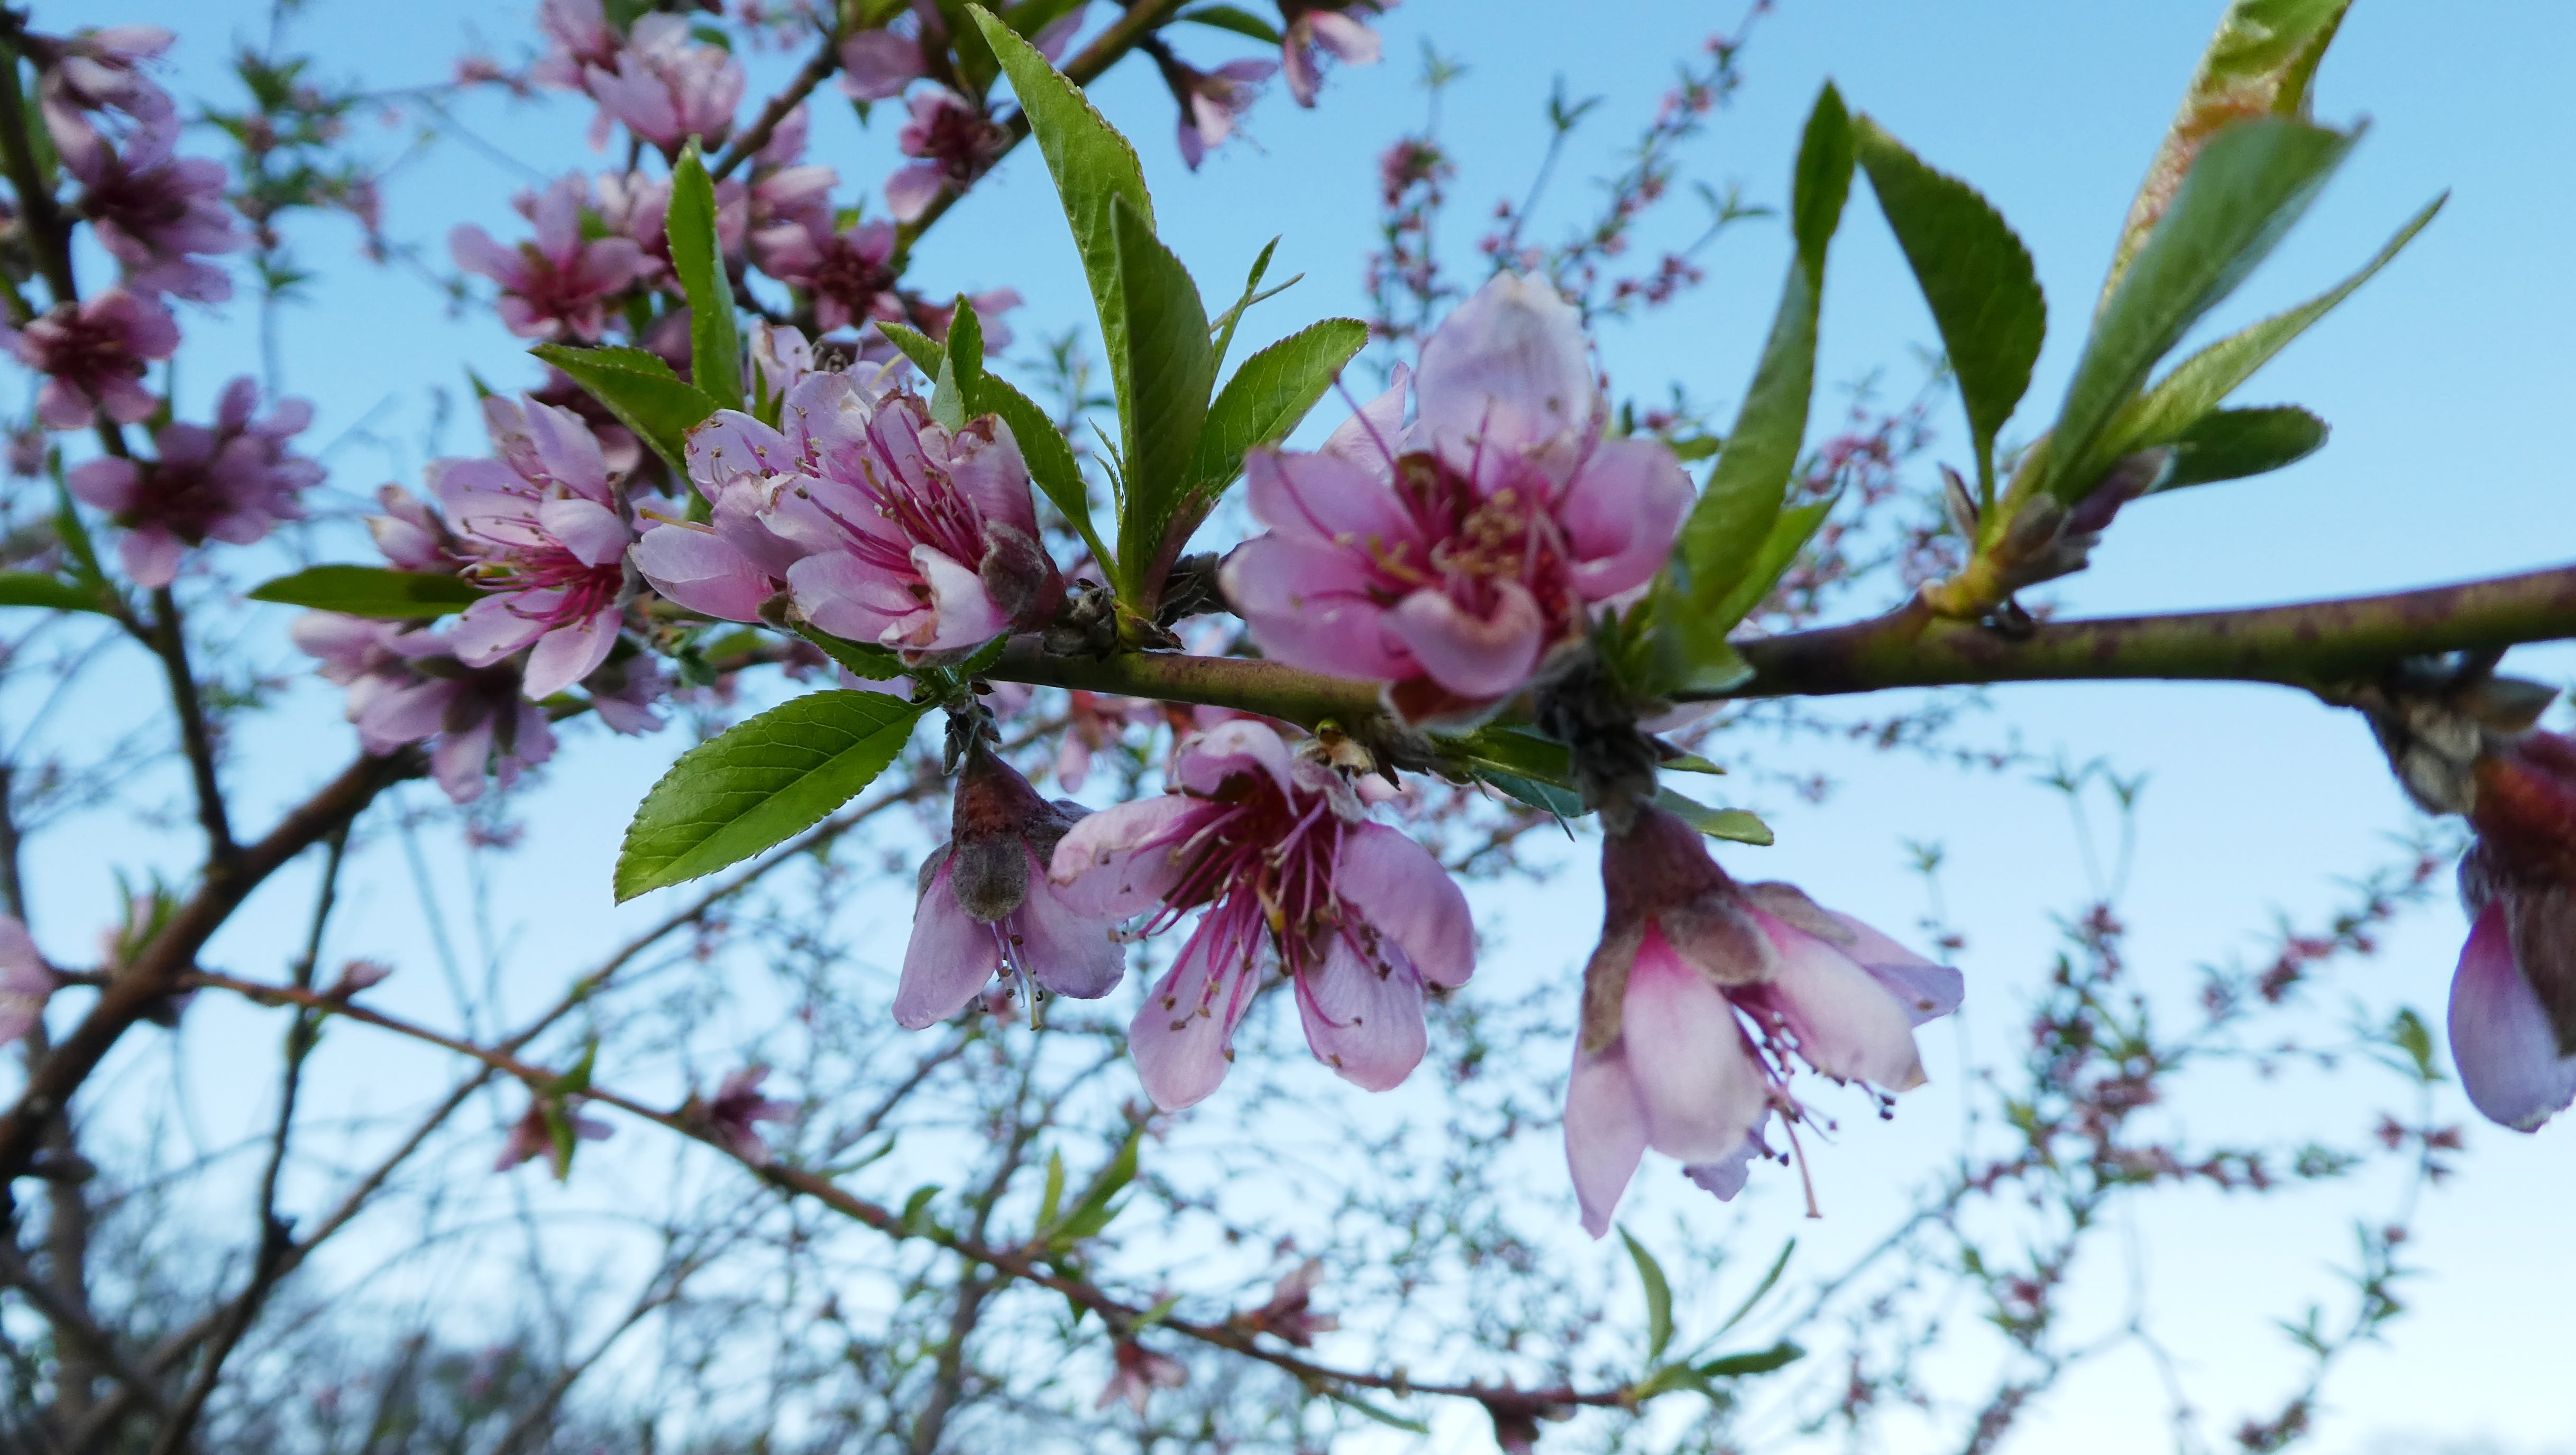 How to protect blooming fruit trees as hard freeze approaches